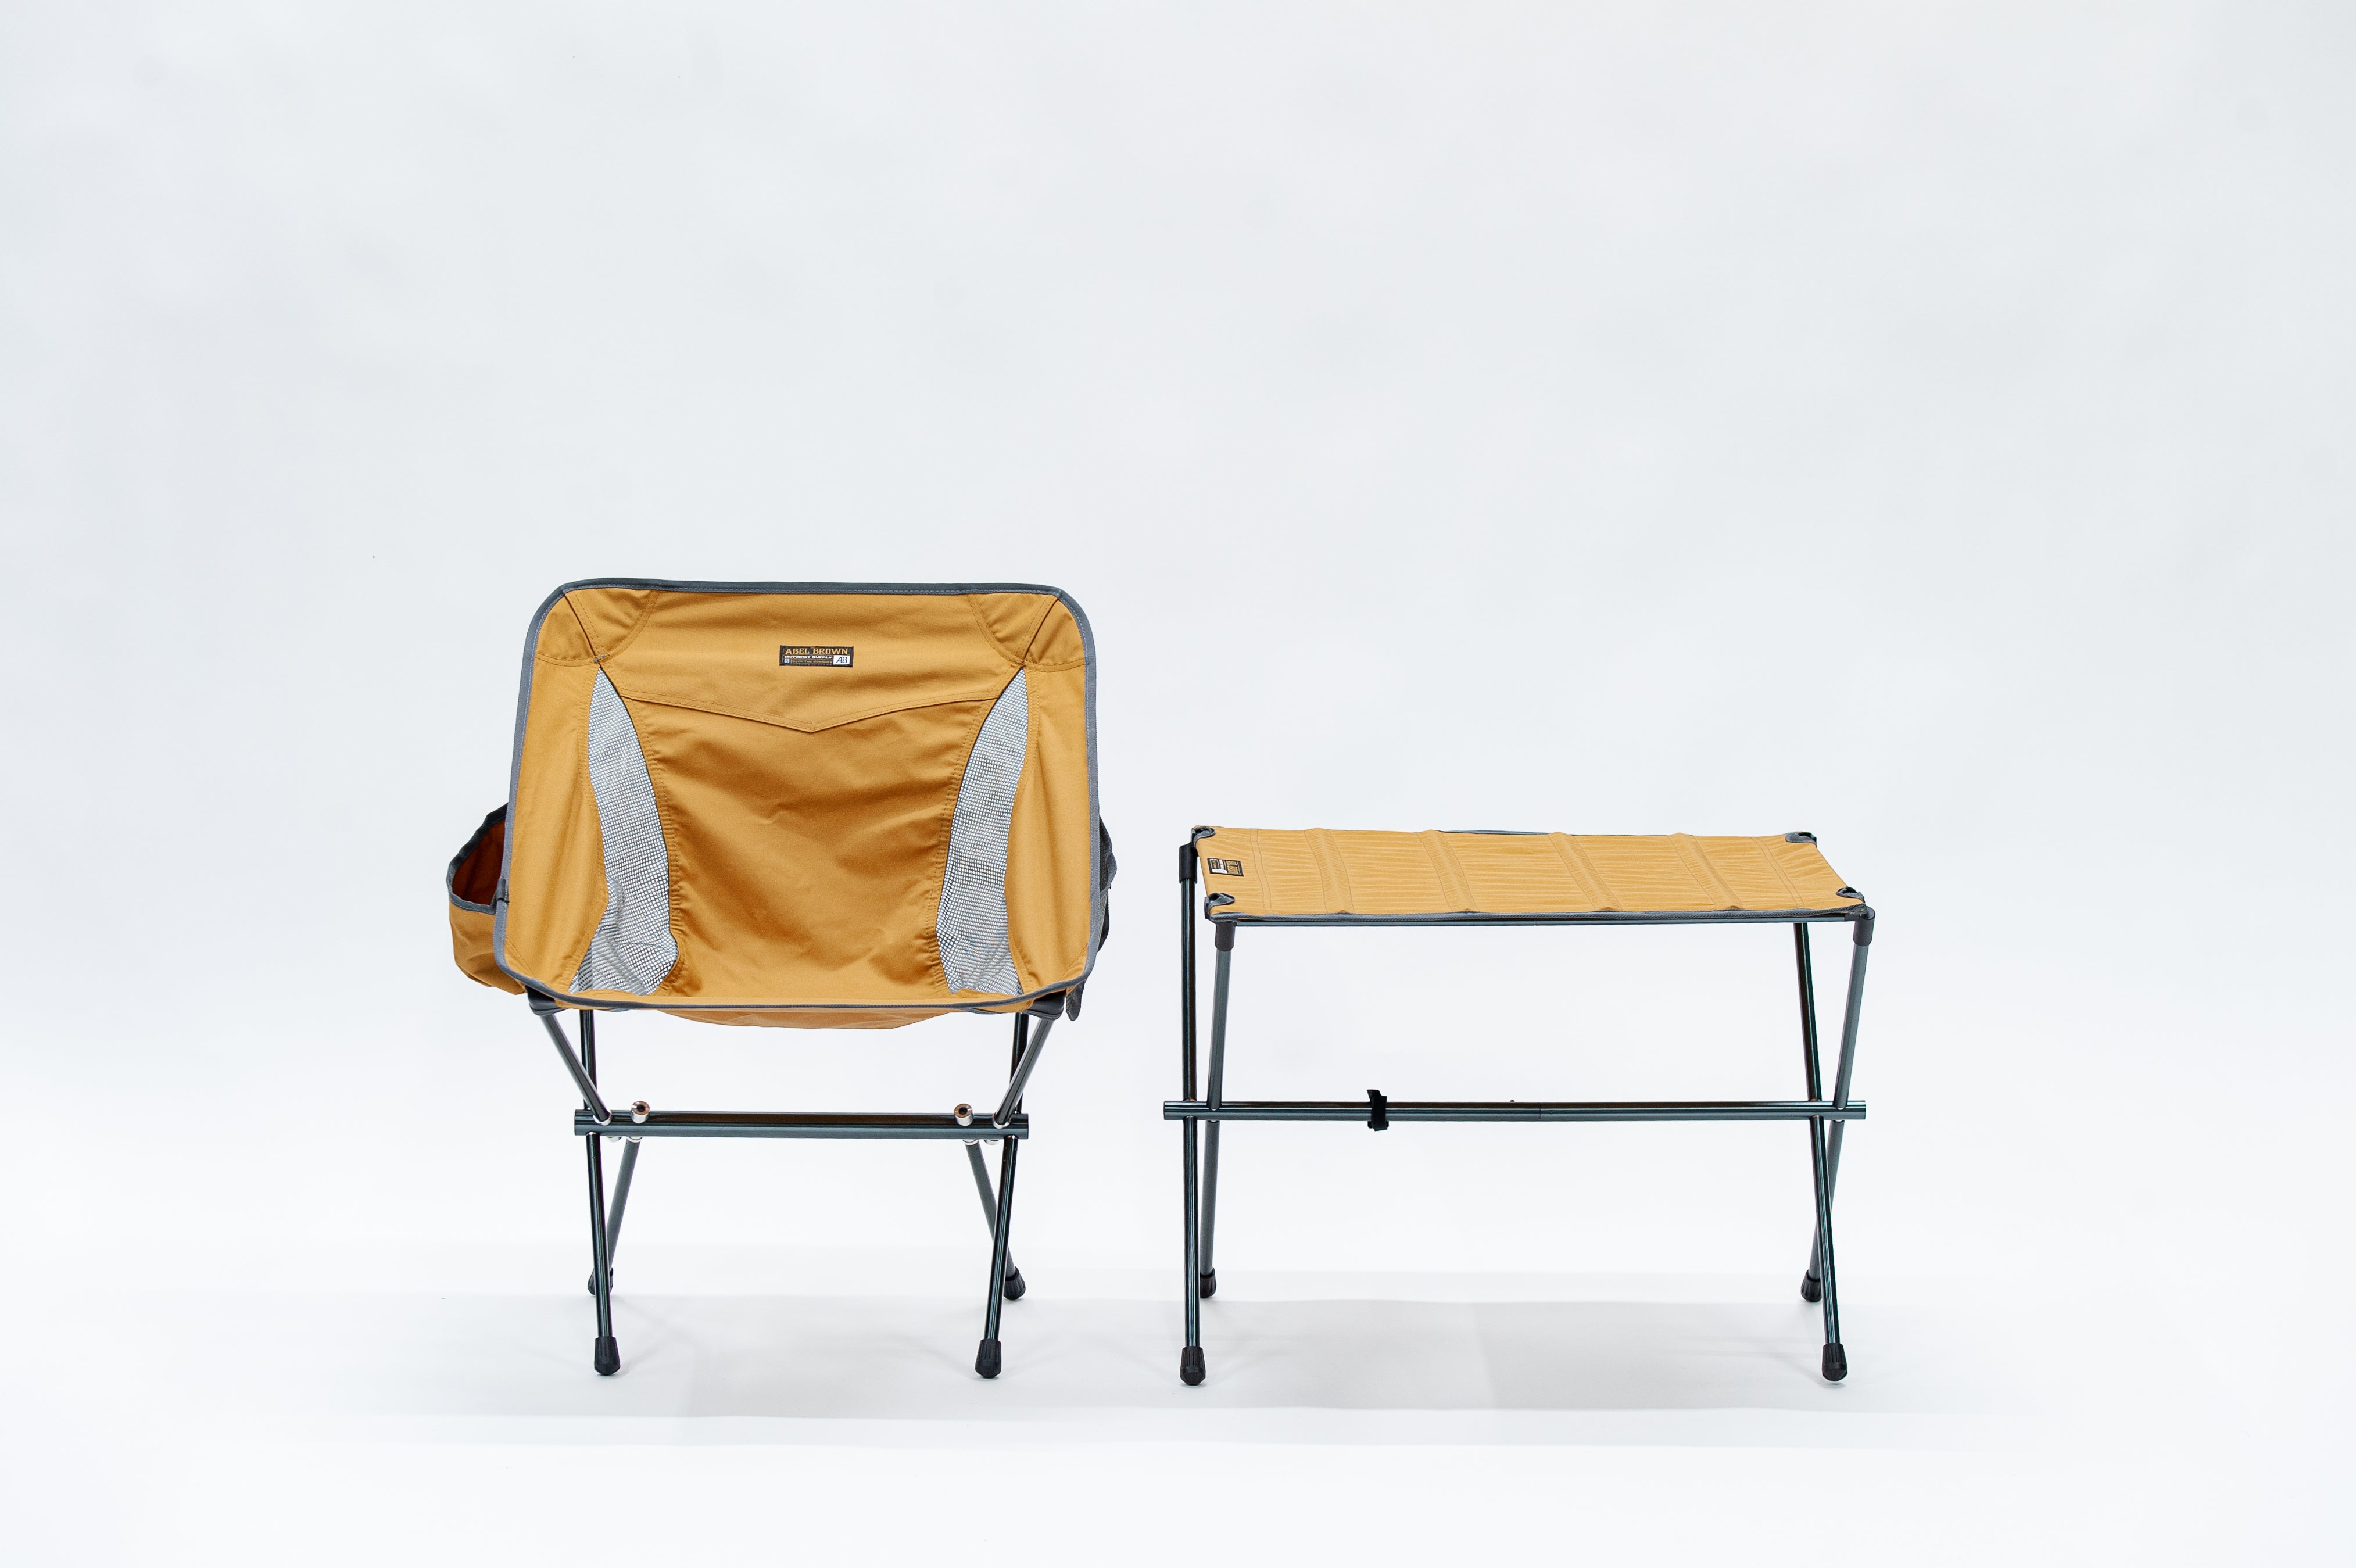 Nomad Camp Combo - Tent + Table + Chair